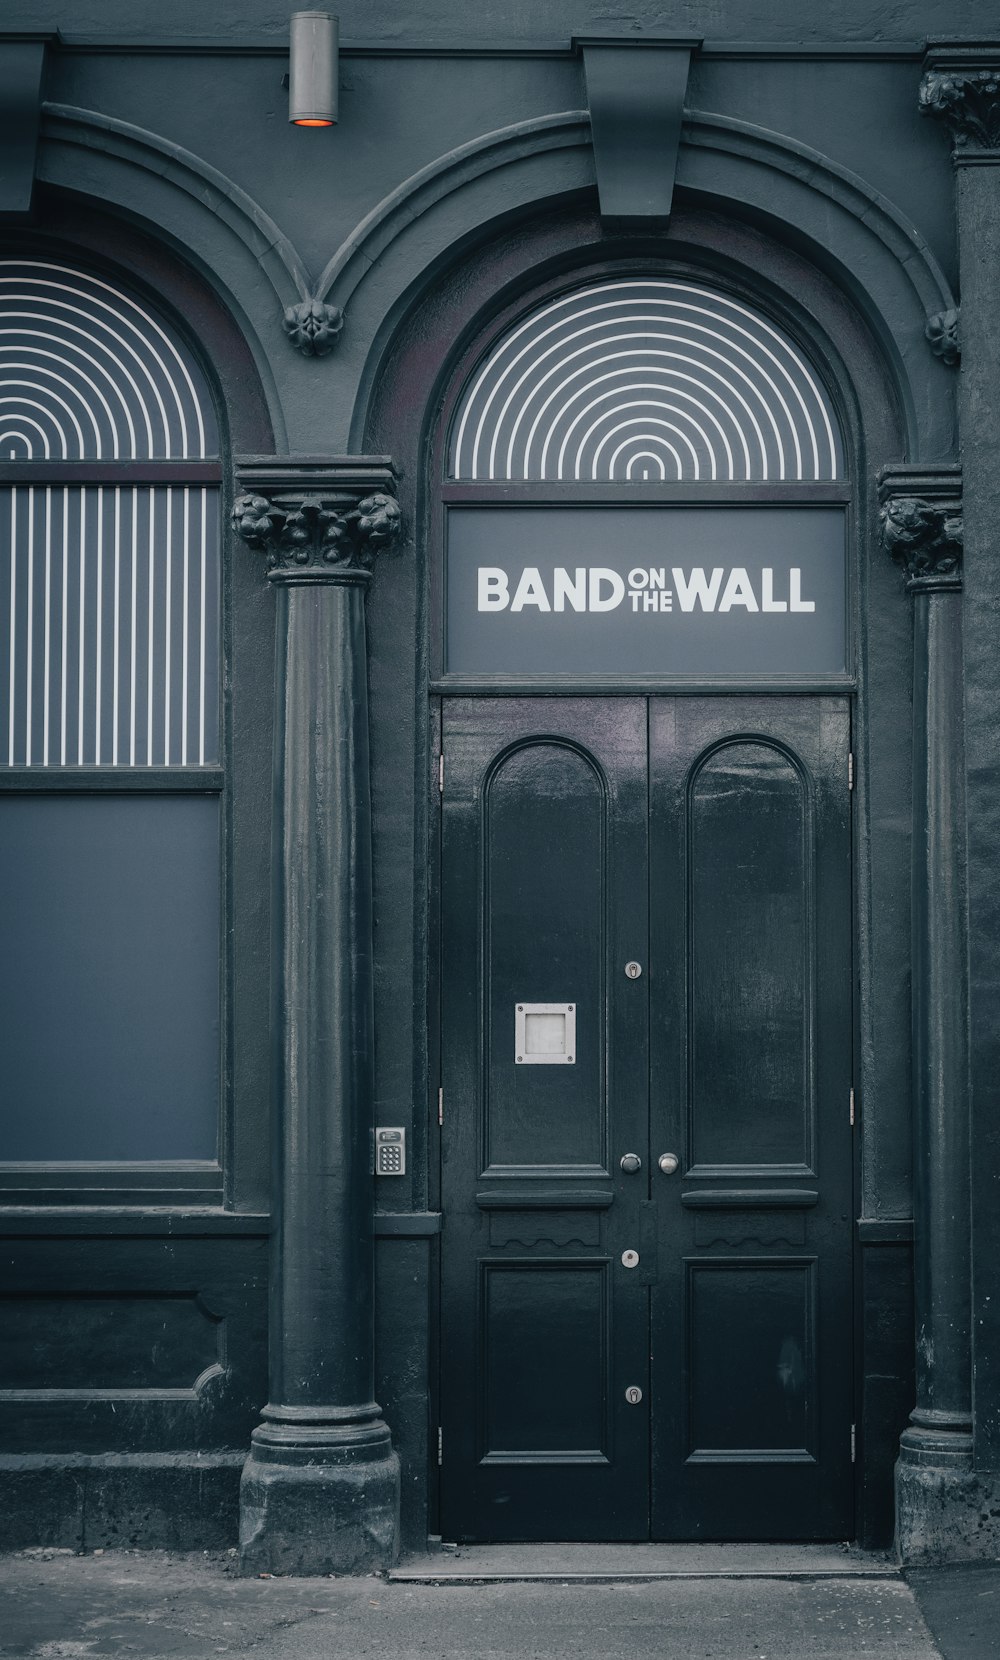 a black building with a band on the wall sign